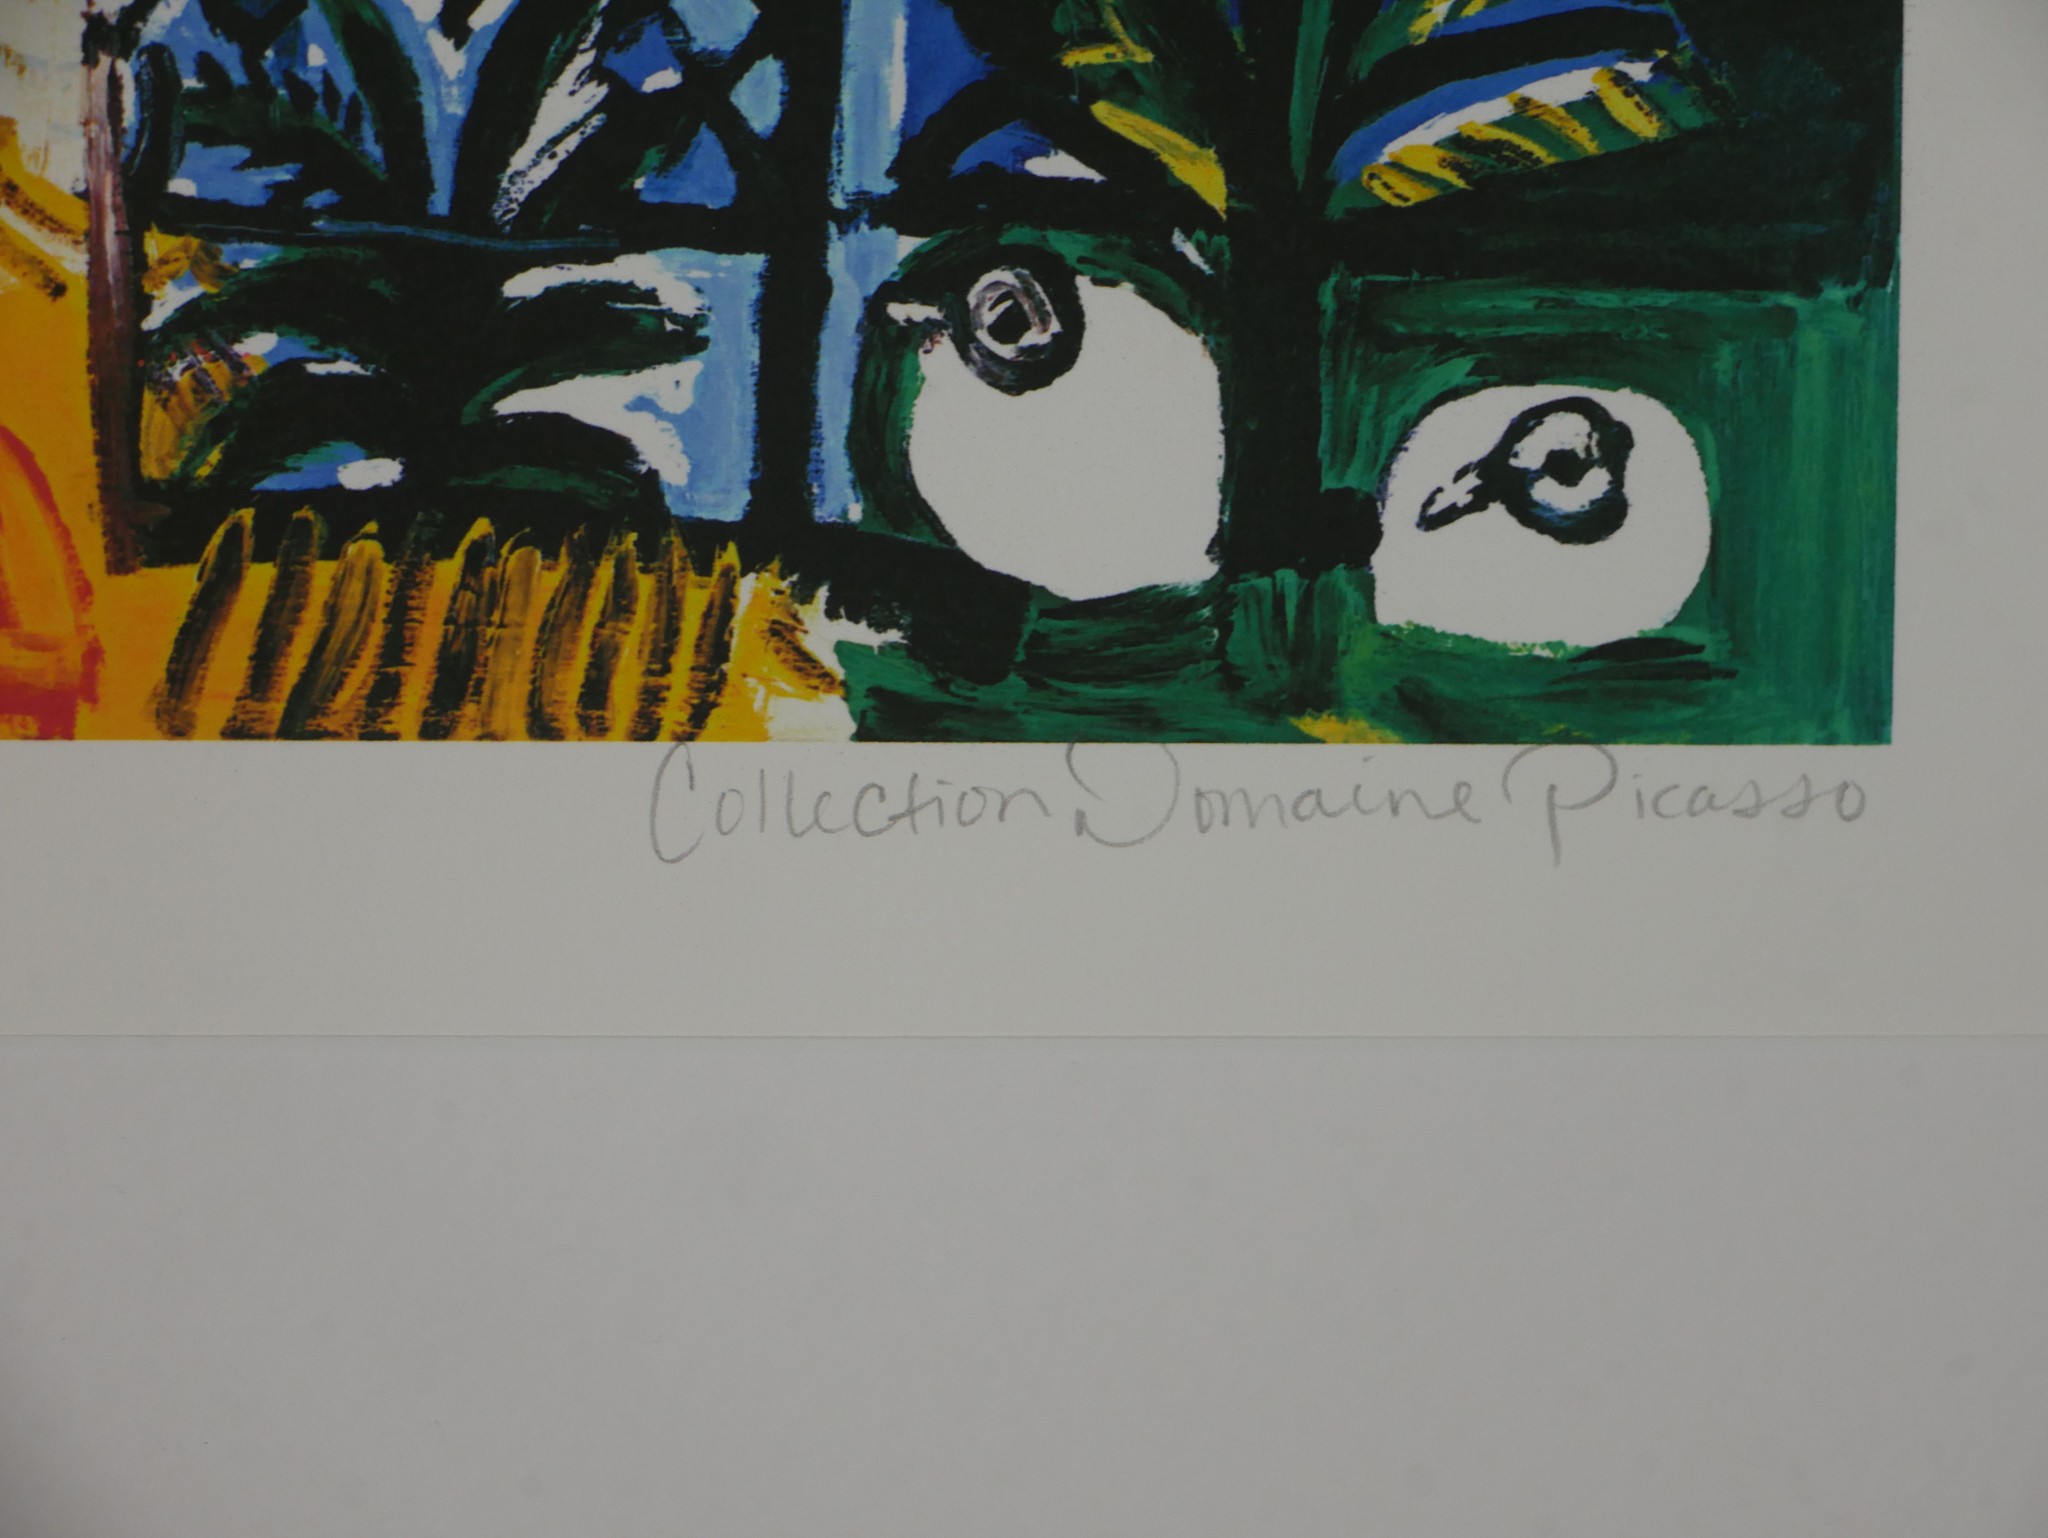 After Pablo Picasso, Les Pigeons (the pigeons), (1957), Giclée print on archival paper, edition - Image 5 of 6